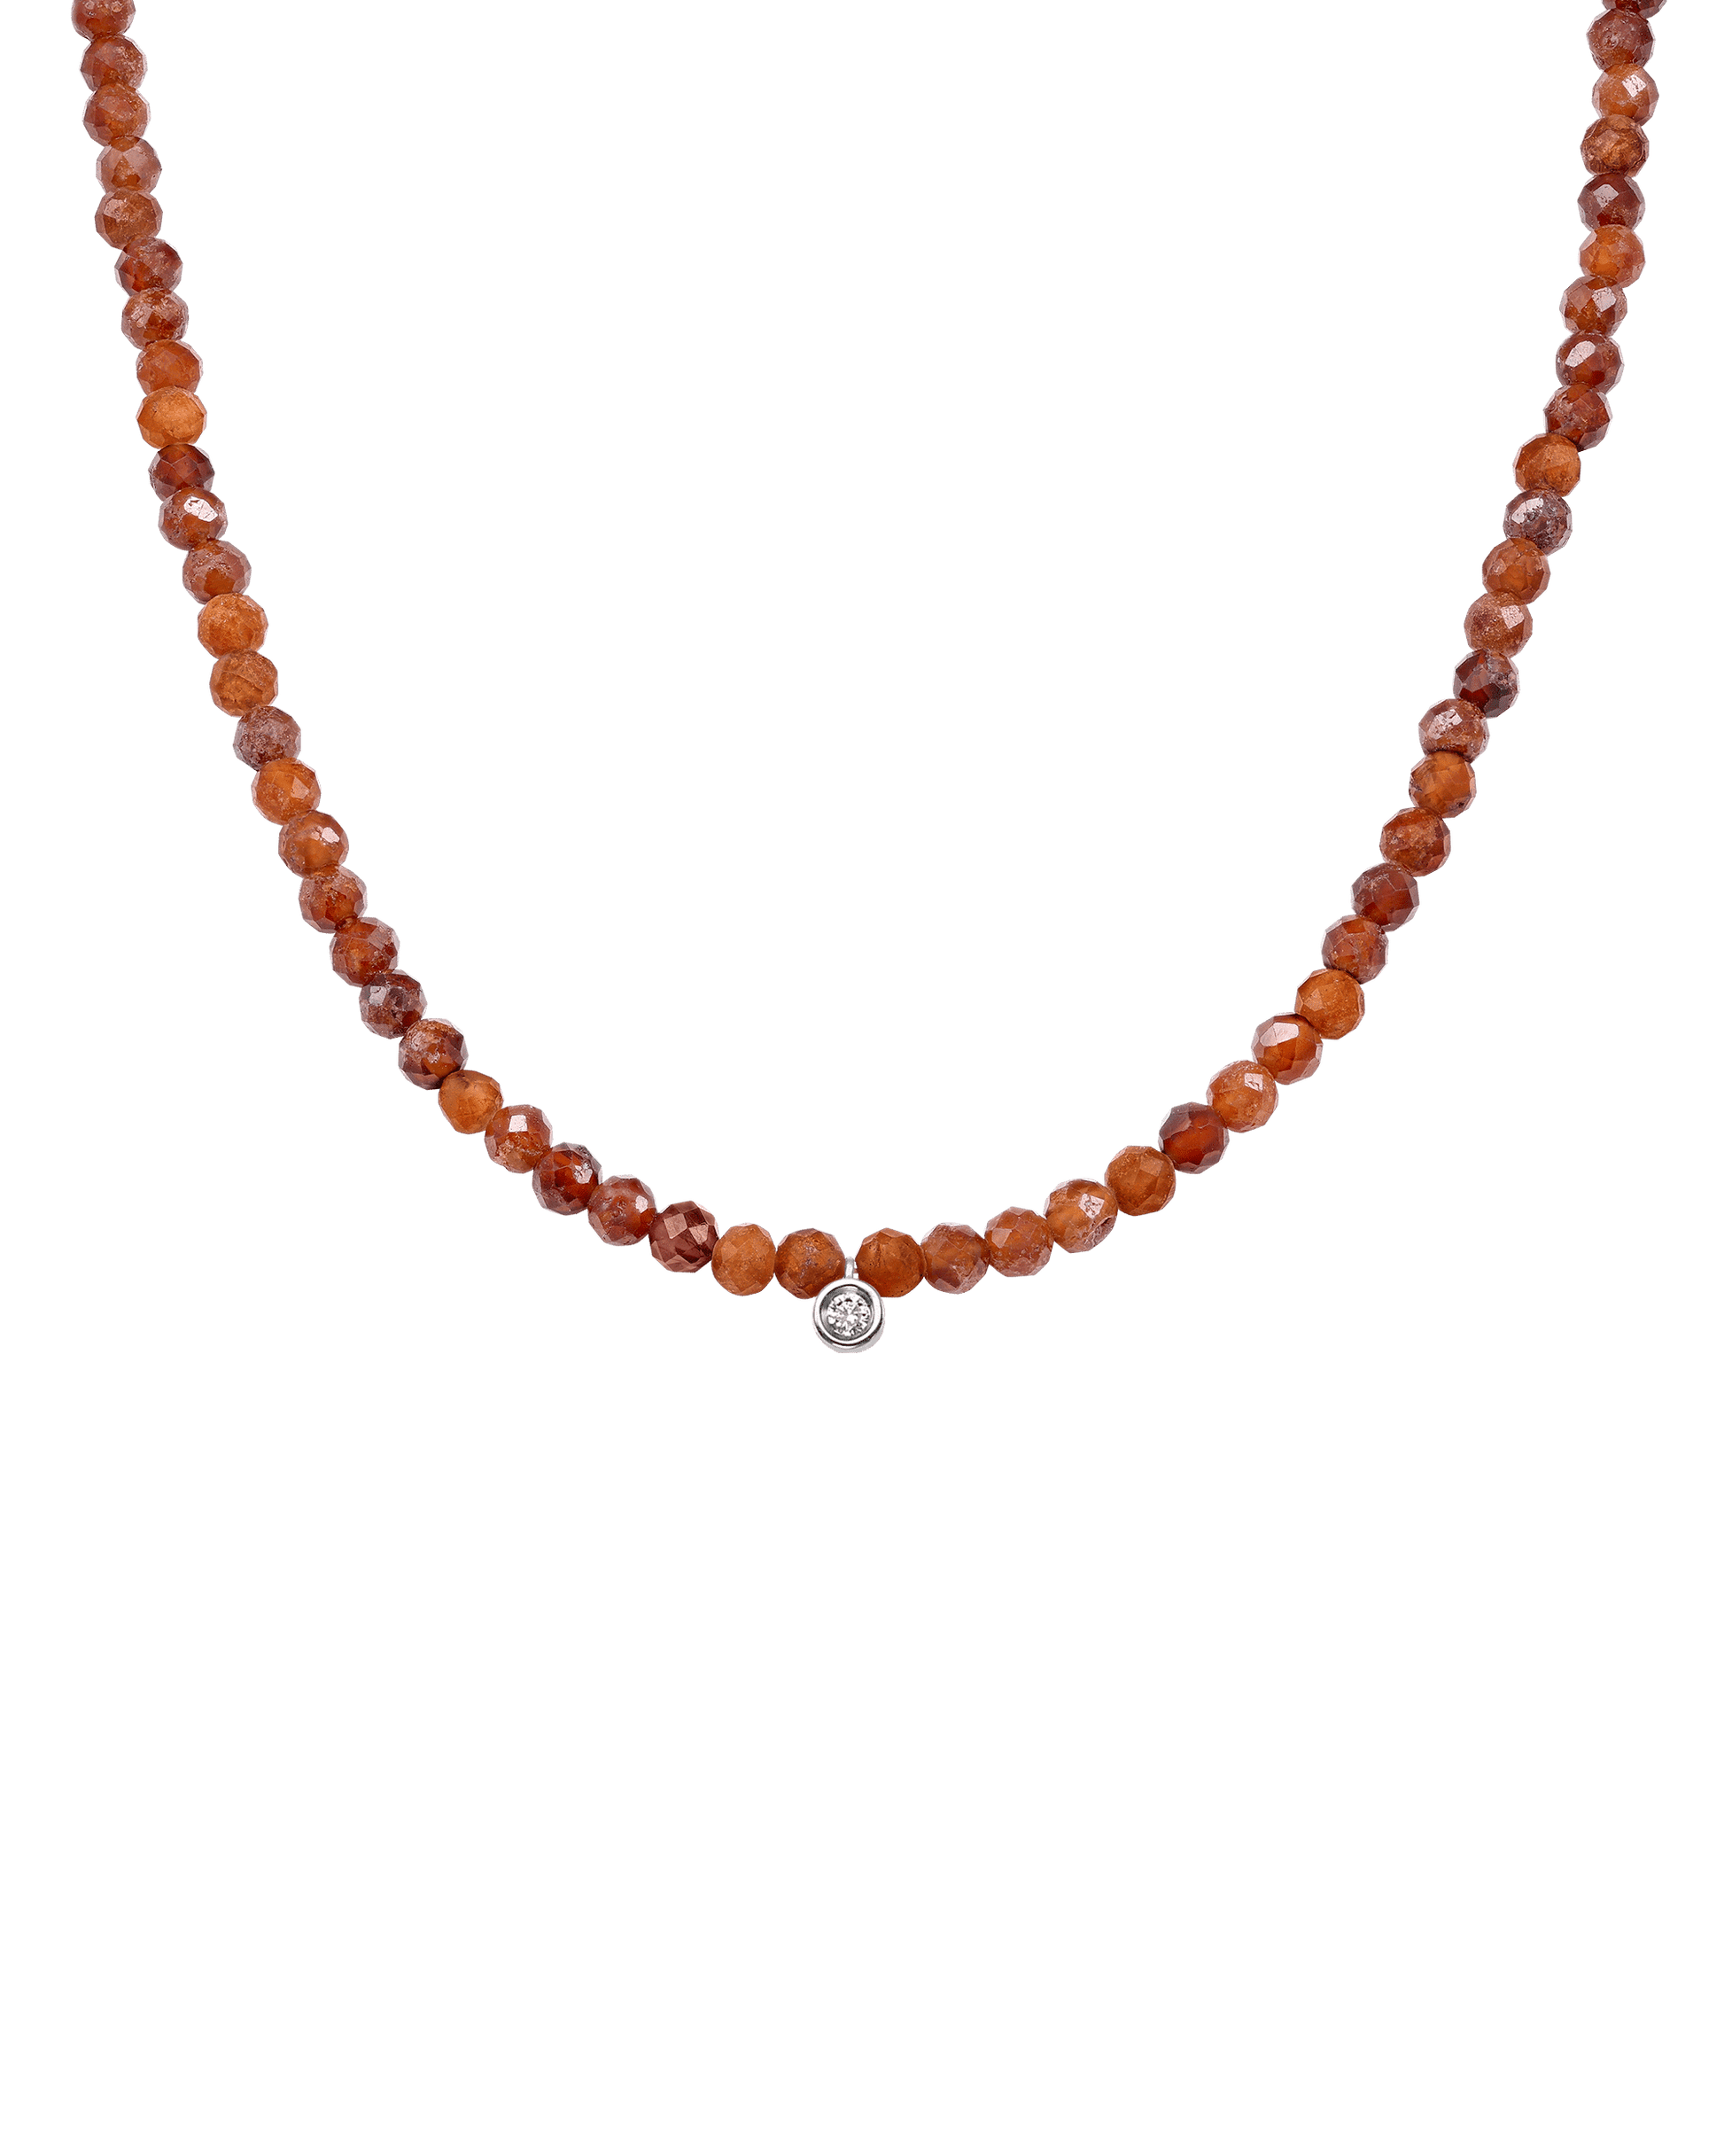 The Gemstone & Diamond Necklace - 14K White Gold Necklaces 14K Solid Gold Natural Garnet Small: 0.03ct 14"